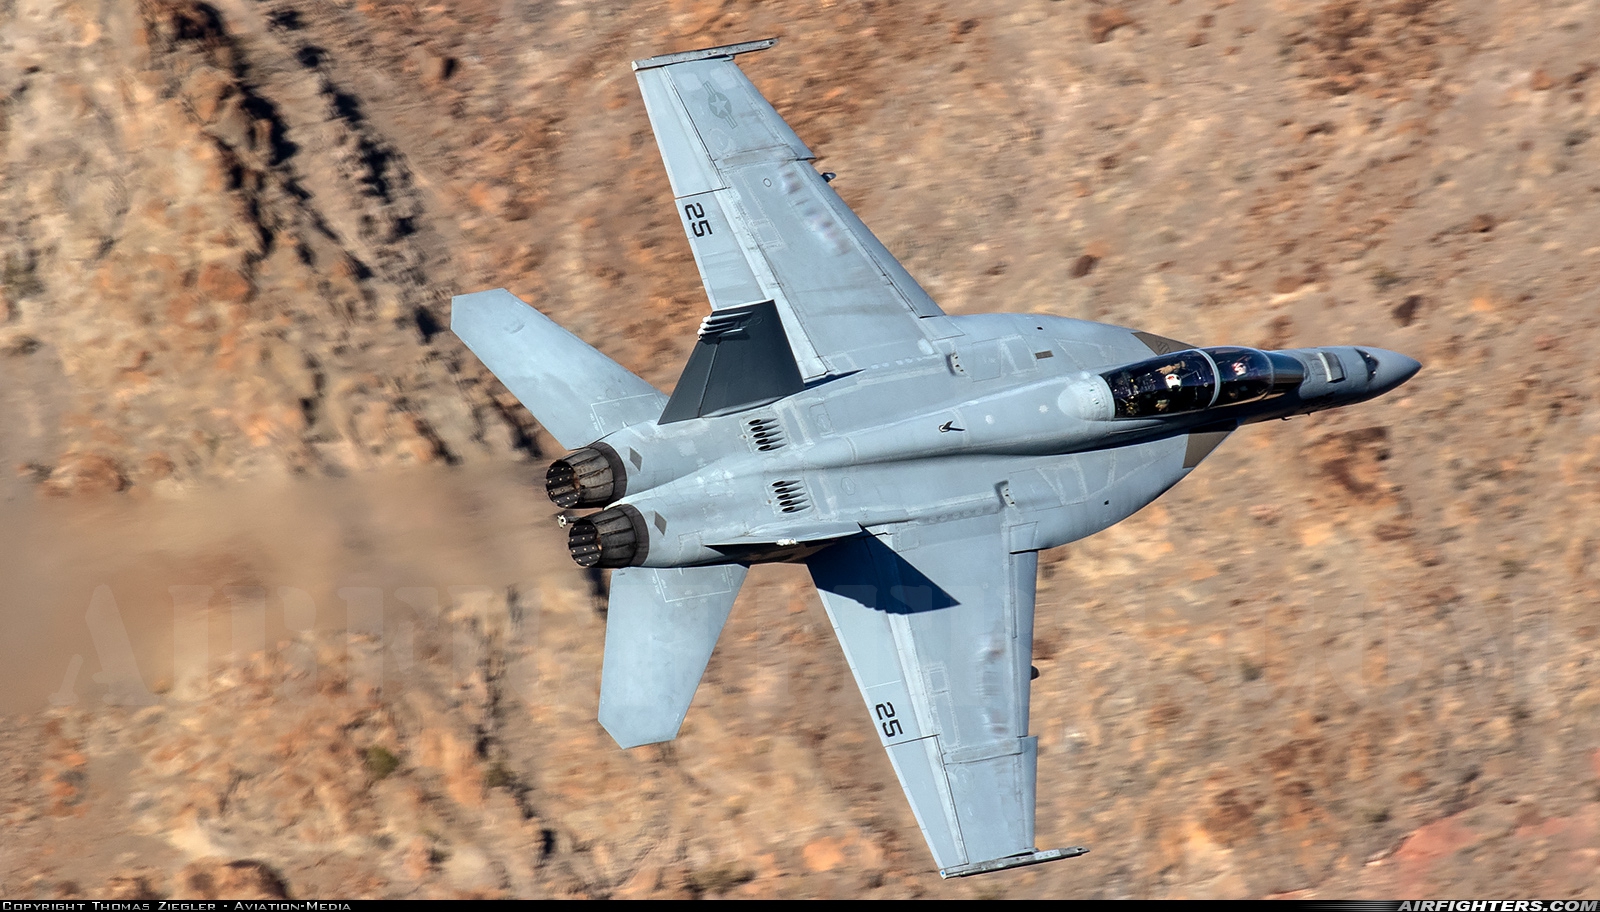 USA - Navy Boeing F/A-18F Super Hornet 166968 at Off-Airport - Rainbow Canyon area, USA